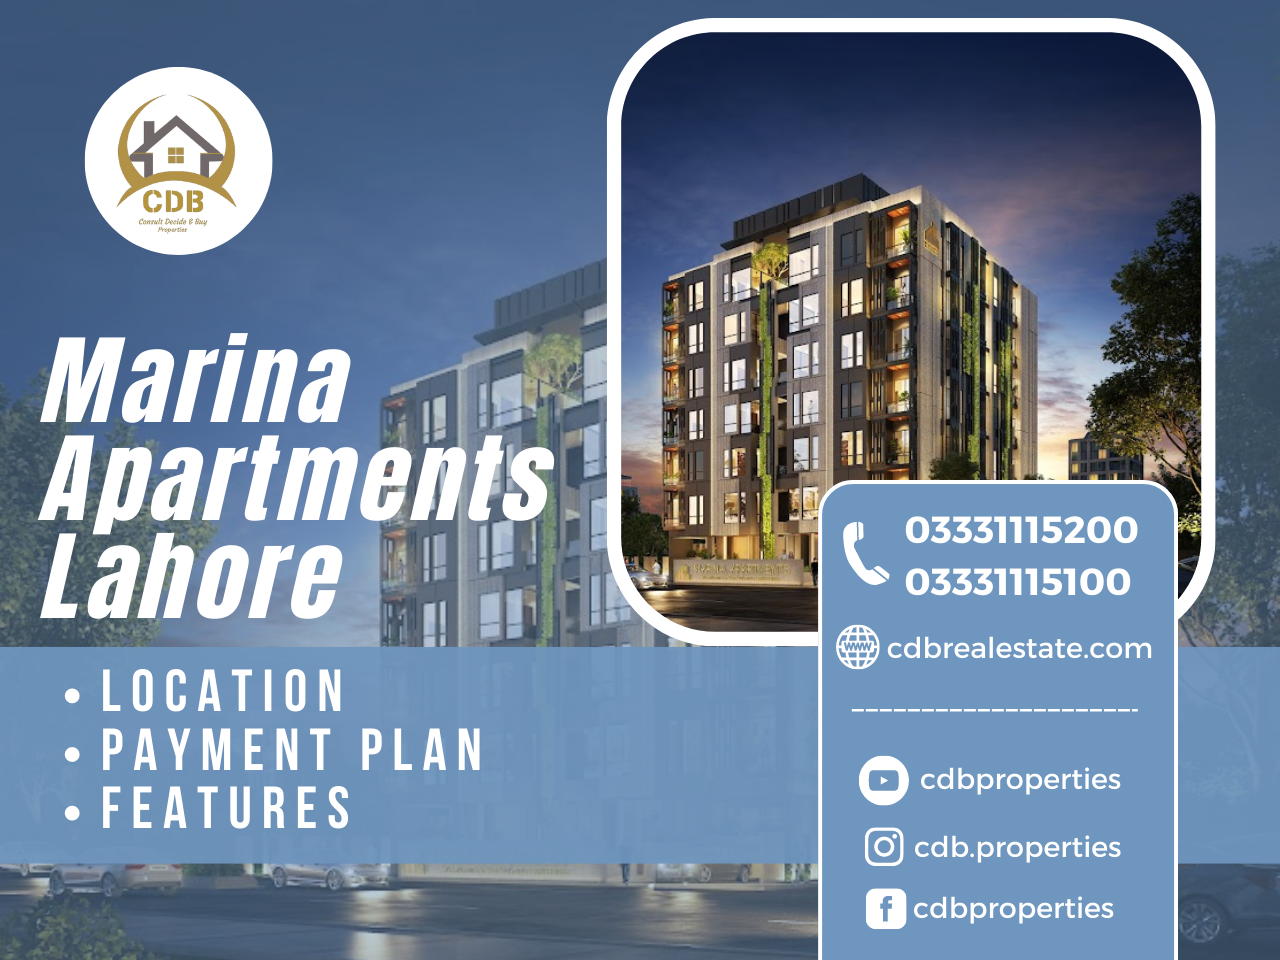 Marina Apartments Lahore - Location, Payment Plan, Features